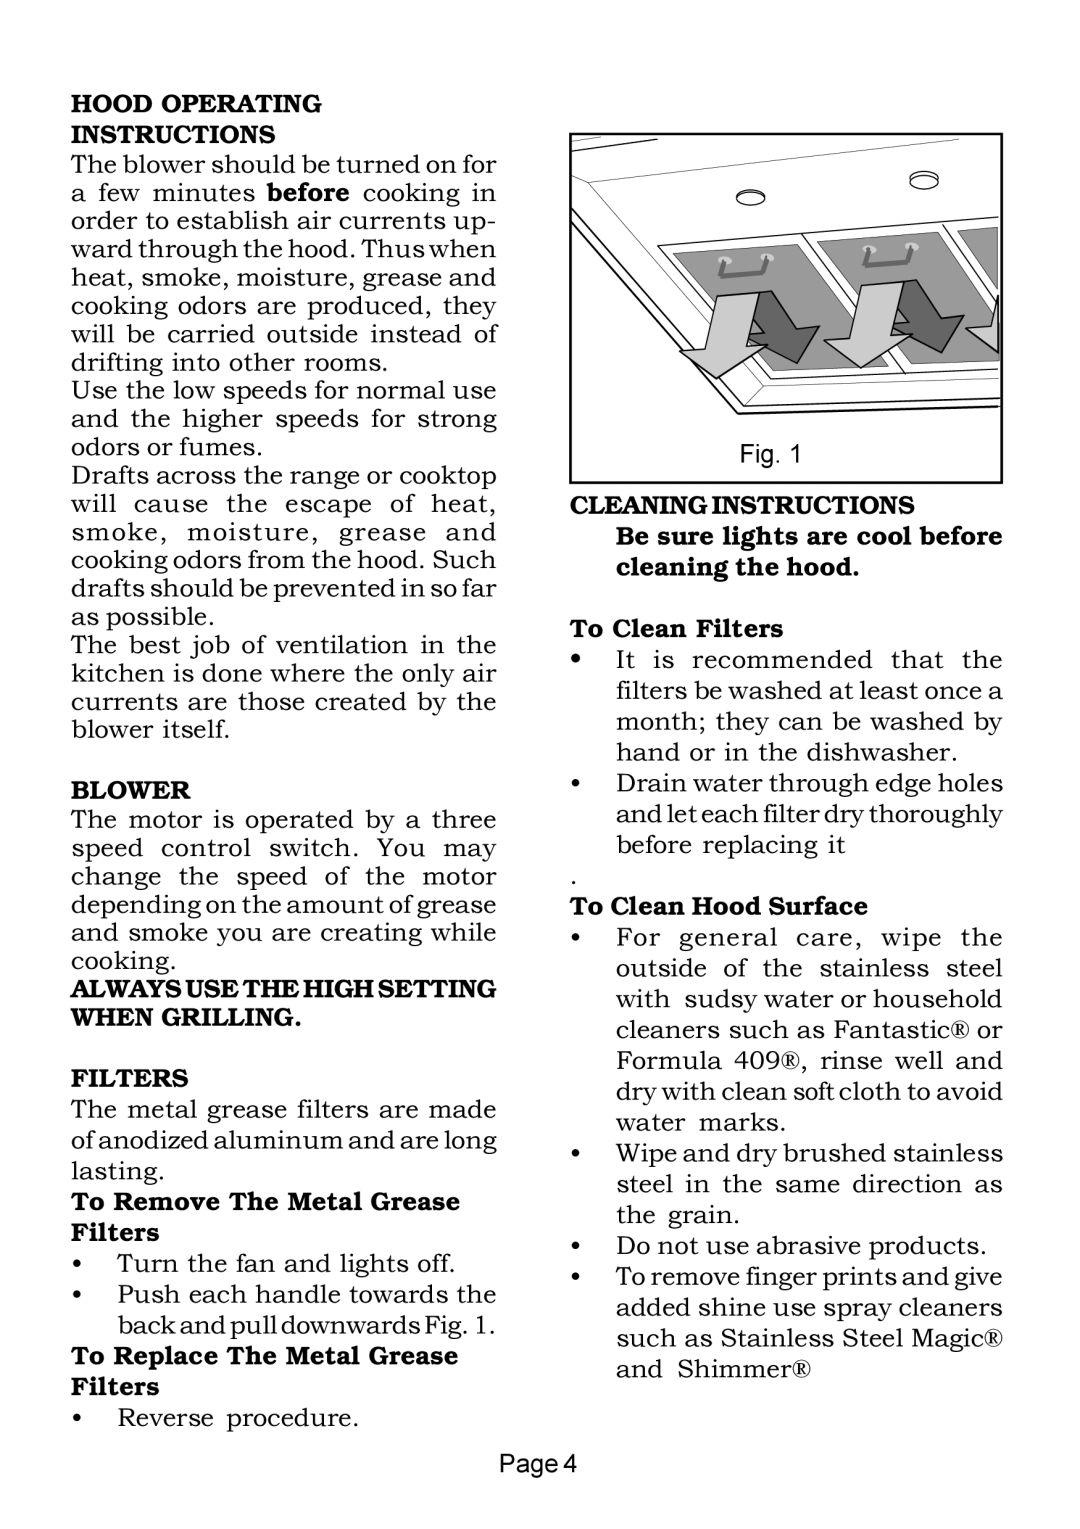 Thermador HSB Hood Operating Instructions, Blower, Always Use The High Setting When Grilling Filters, To Clean Filters 